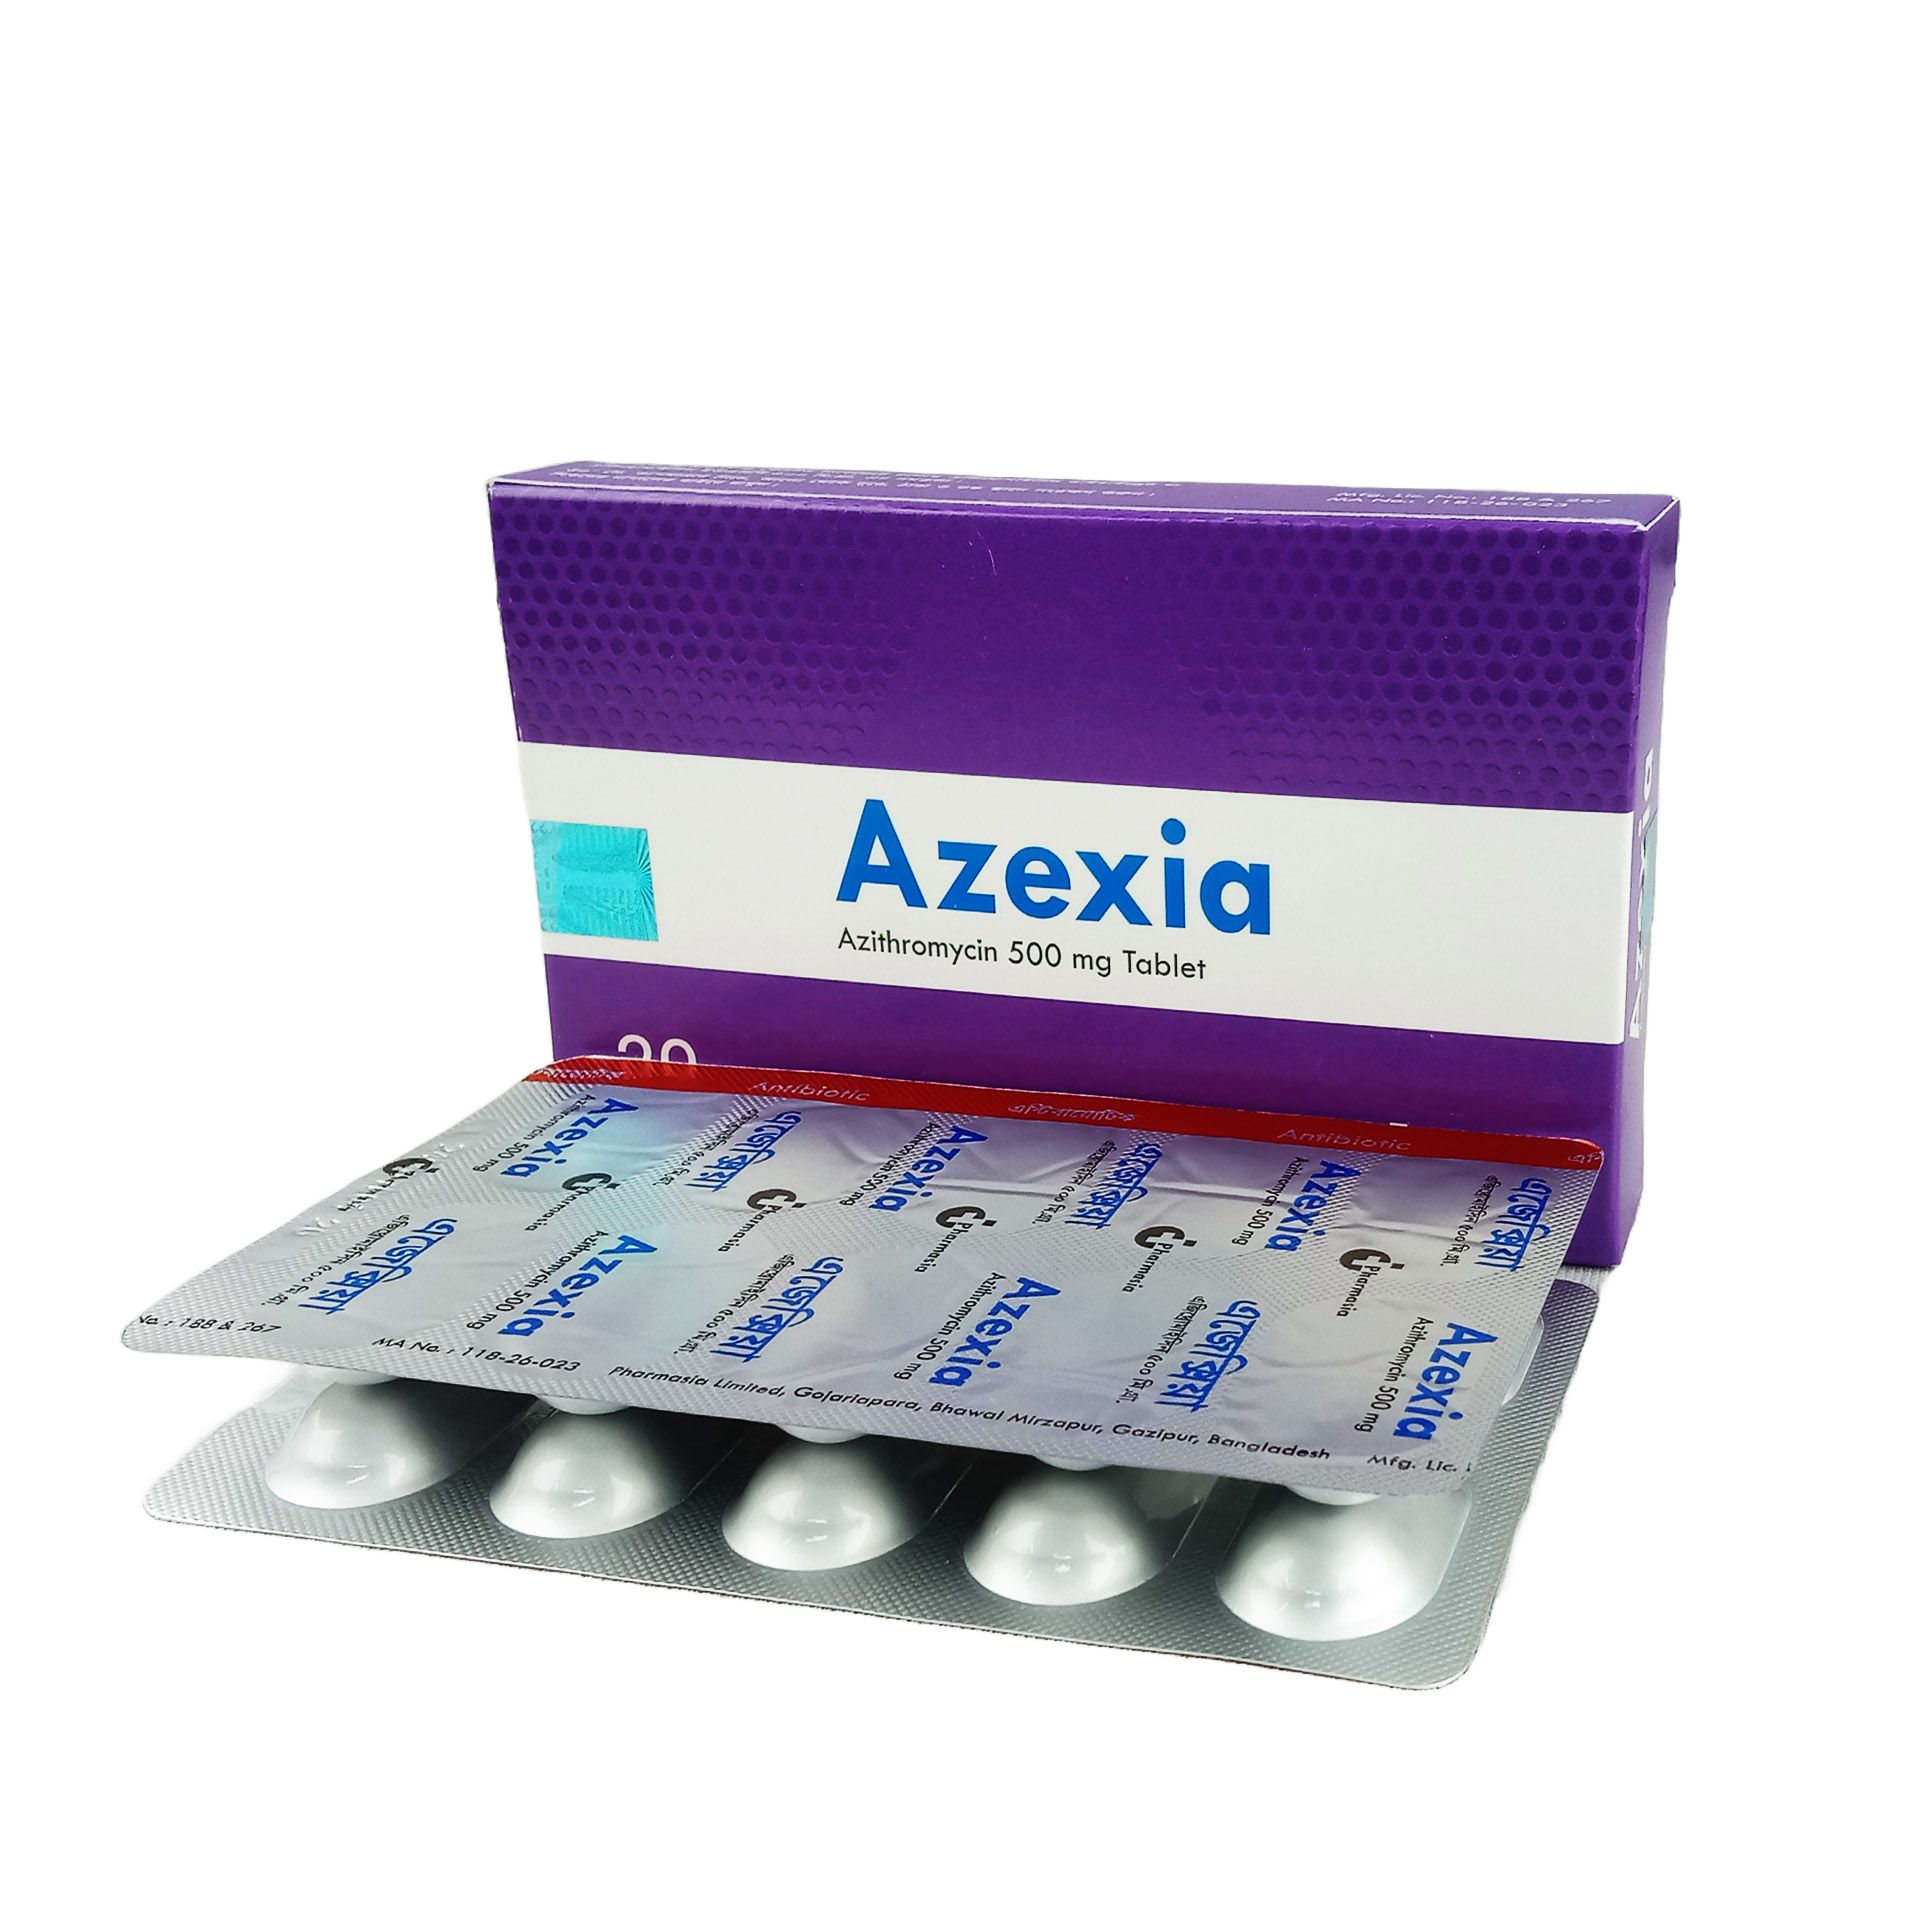 Azexia 500mg Tablet